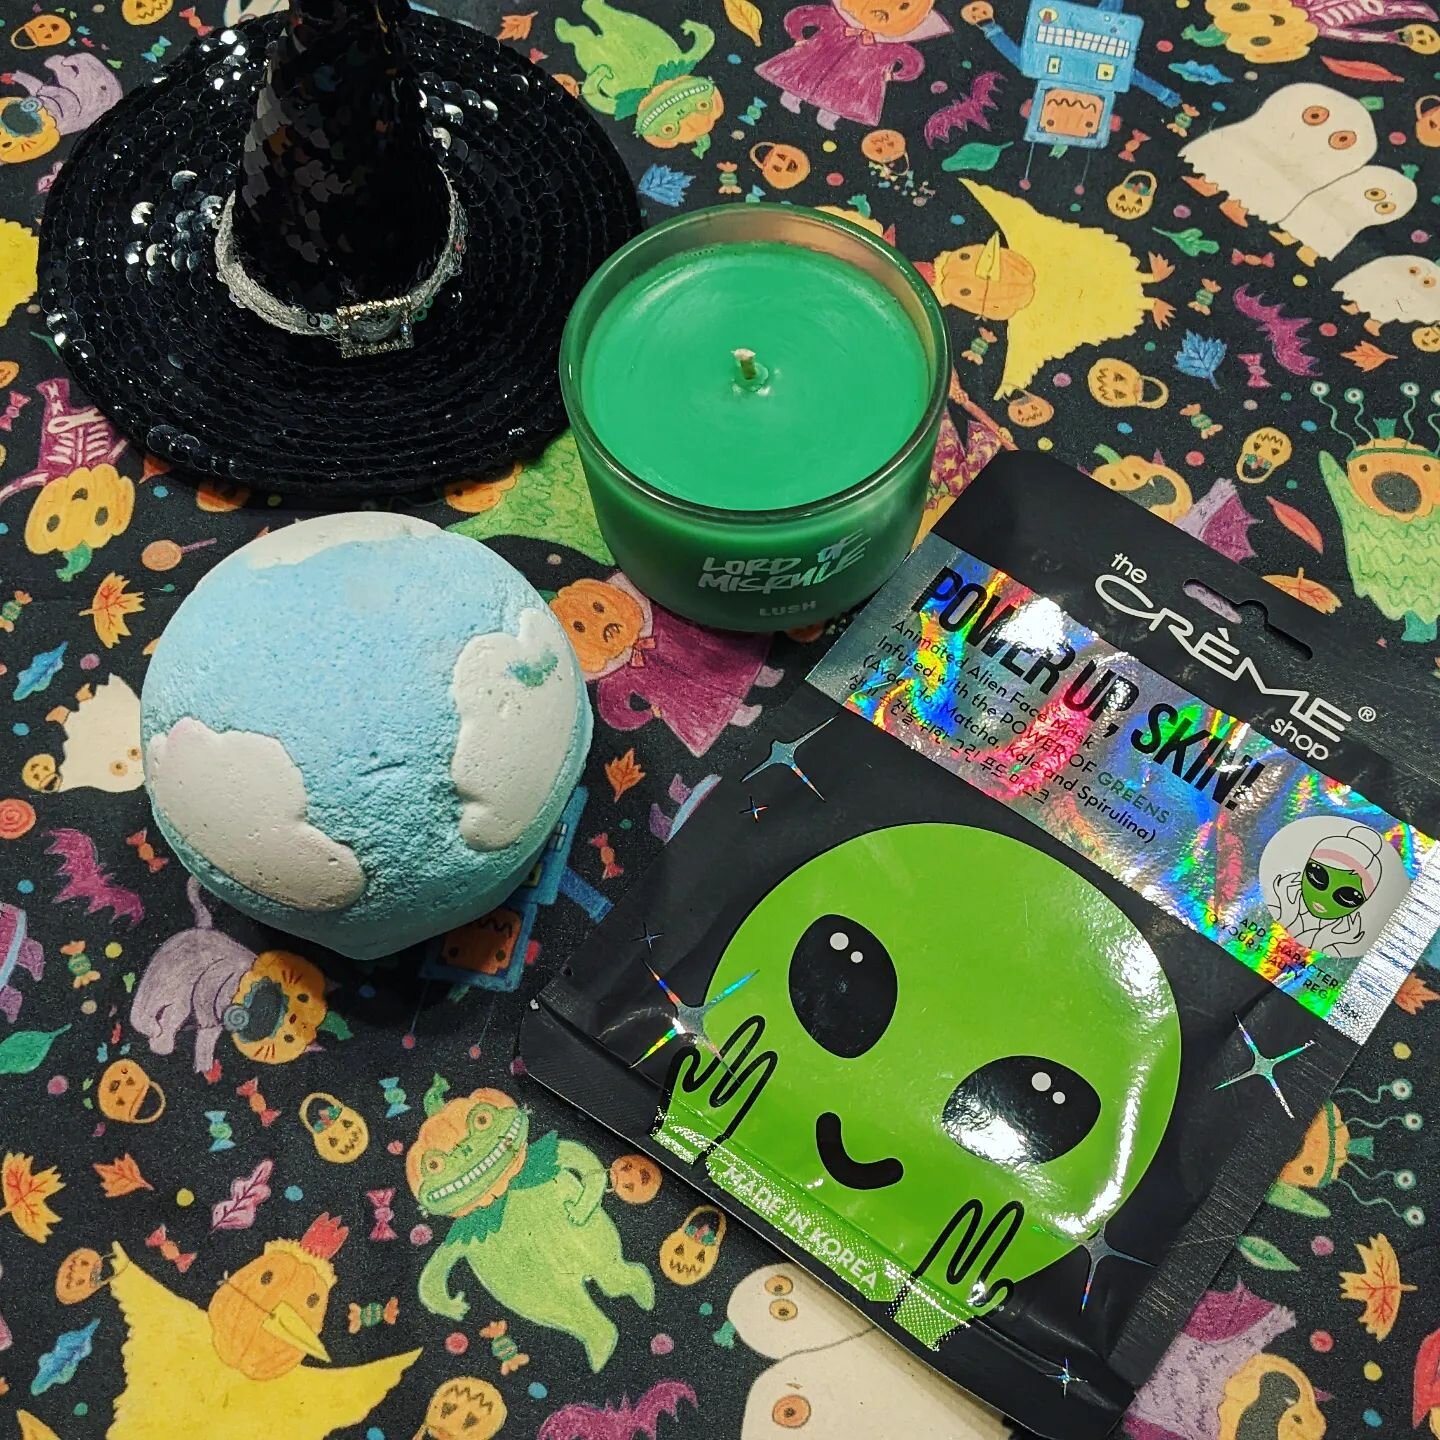 ✨ Am I the Fresh Prince of Bel-Air? 
*
Because my life got flipped, turned upside down. And I'd like to take a minute, just sit right there, to have some cute and spooky, colorful self care. (Omg, hi, I'm a huge dork, in case you forgot.)
*
#lush #lu